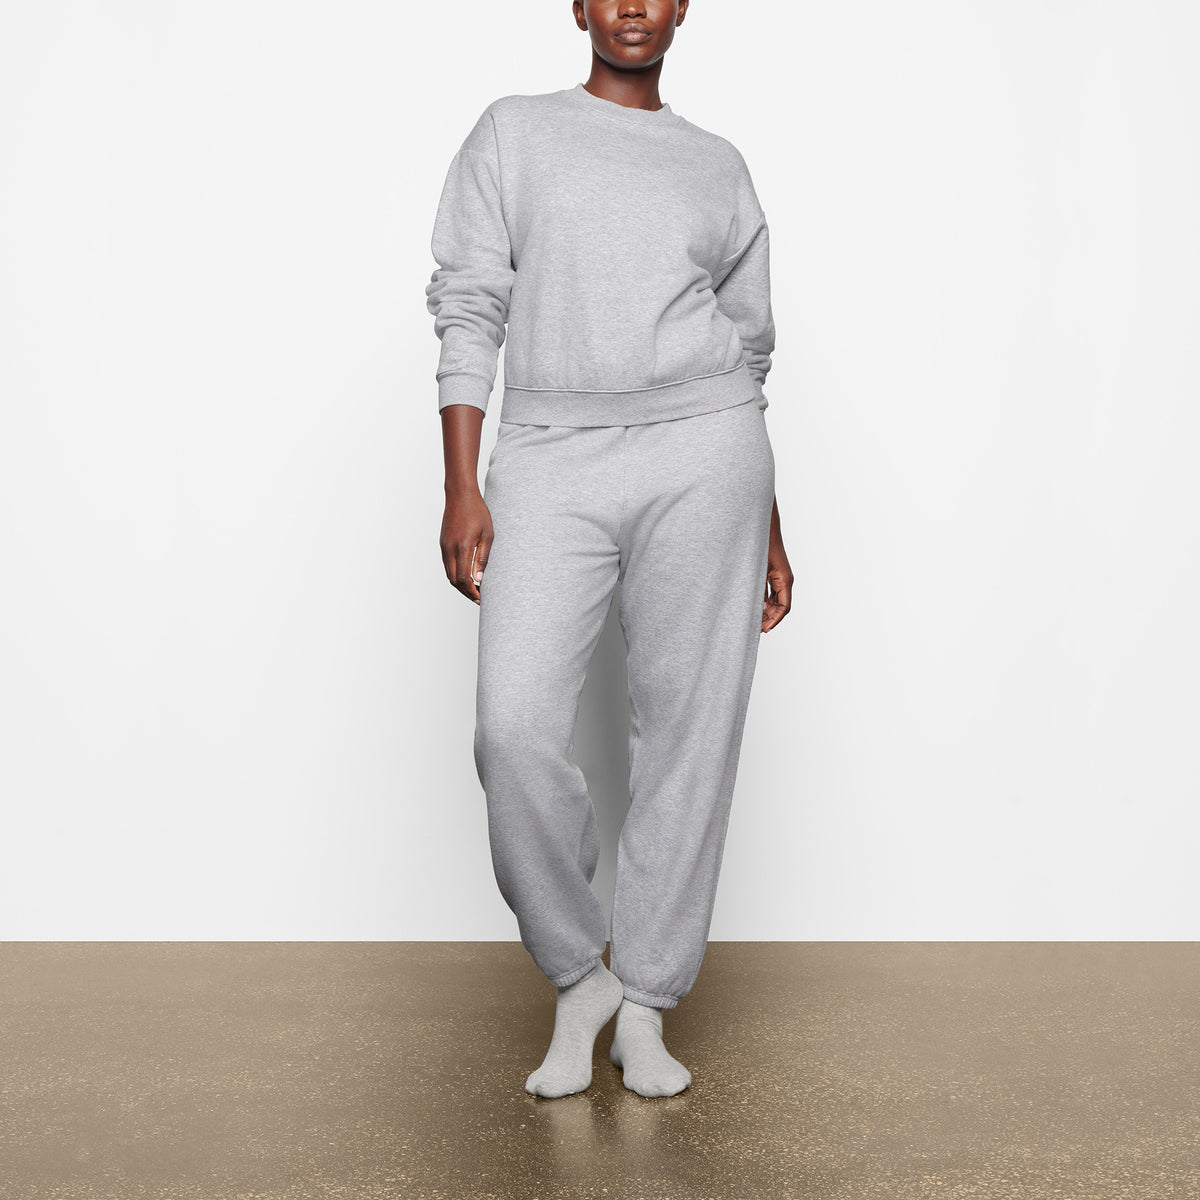 SKIMS - Get ready to cozy up in Cotton Fleece, a fresh